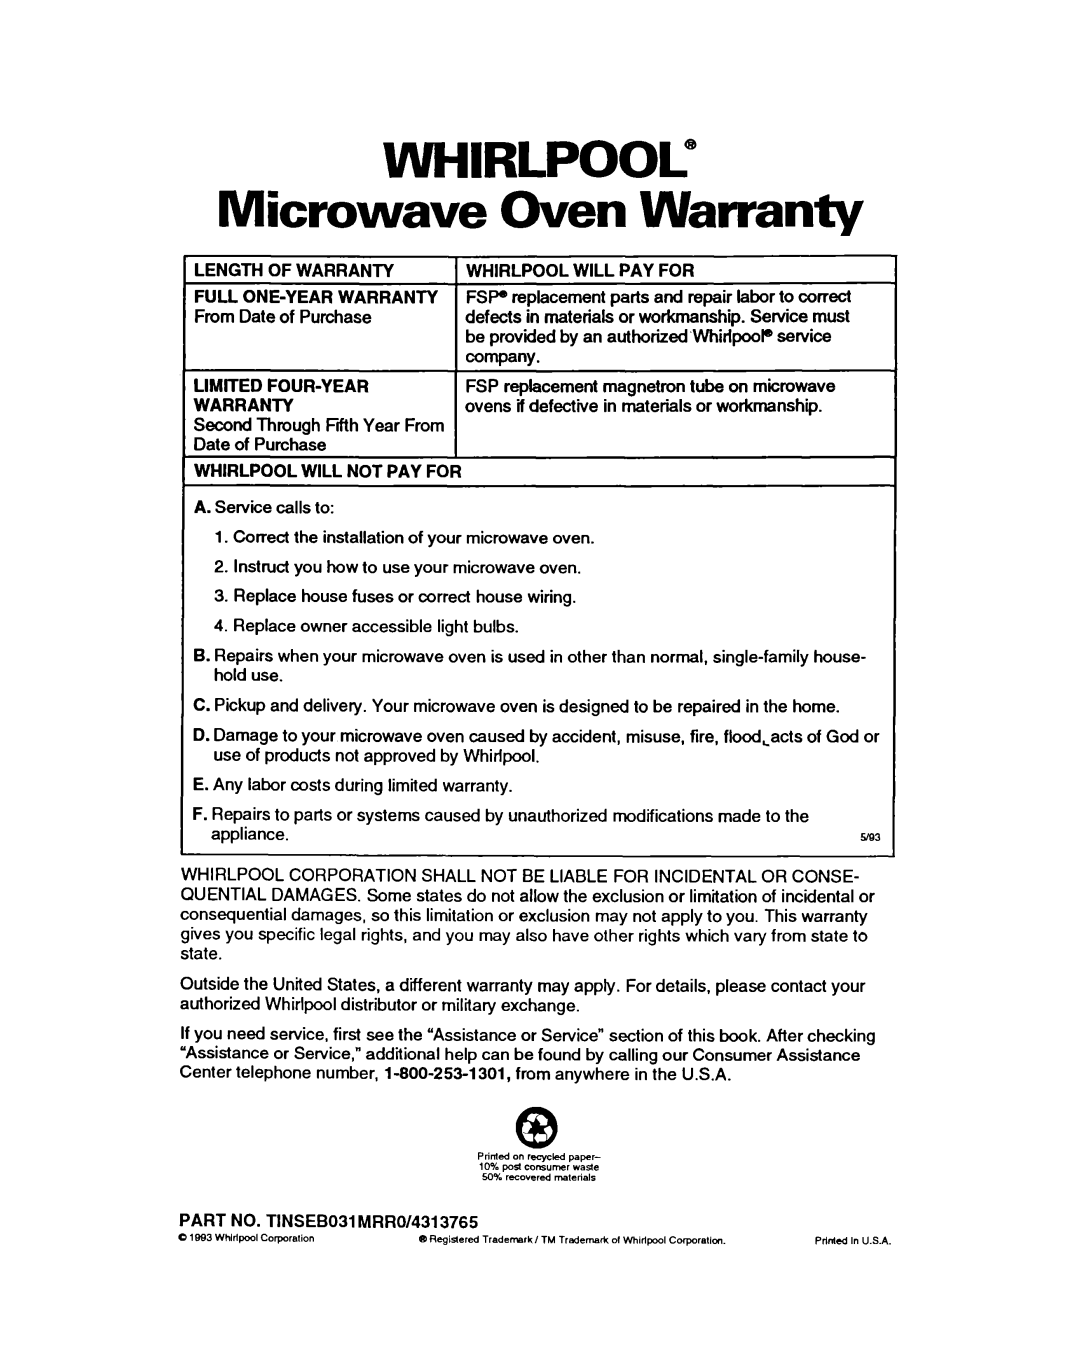 Whirlpool MT9160XBB warranty Microwave Oven Warranty, Whirlpool Will Pay For, LlMlTED FOUR-YEAR, Whirlpool Will Not Pay For 